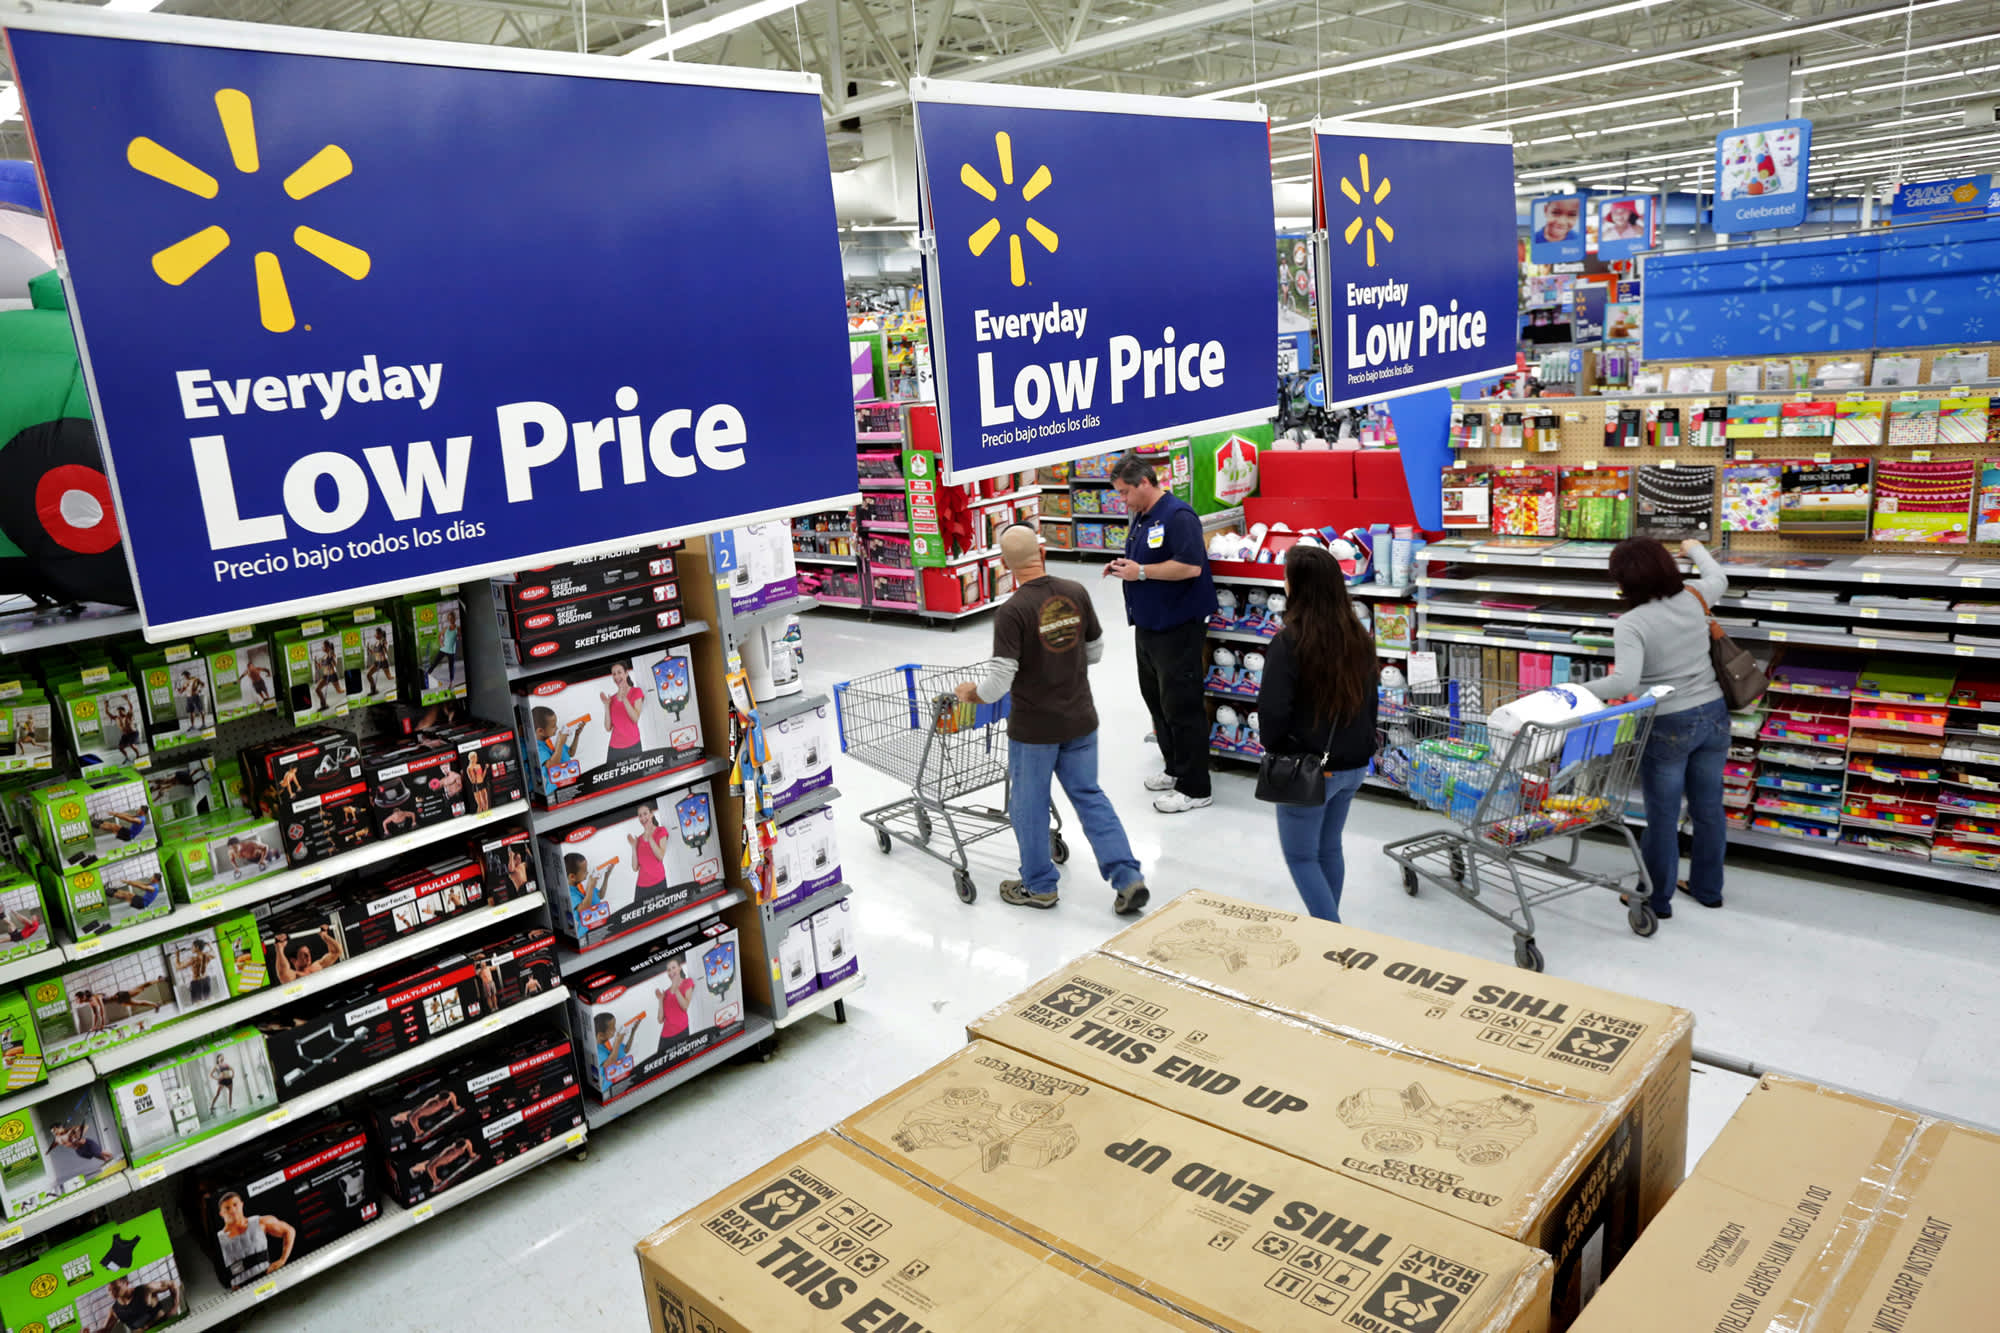 10-reasons-to-buy-wal-mart-right-now-according-to-jefferies